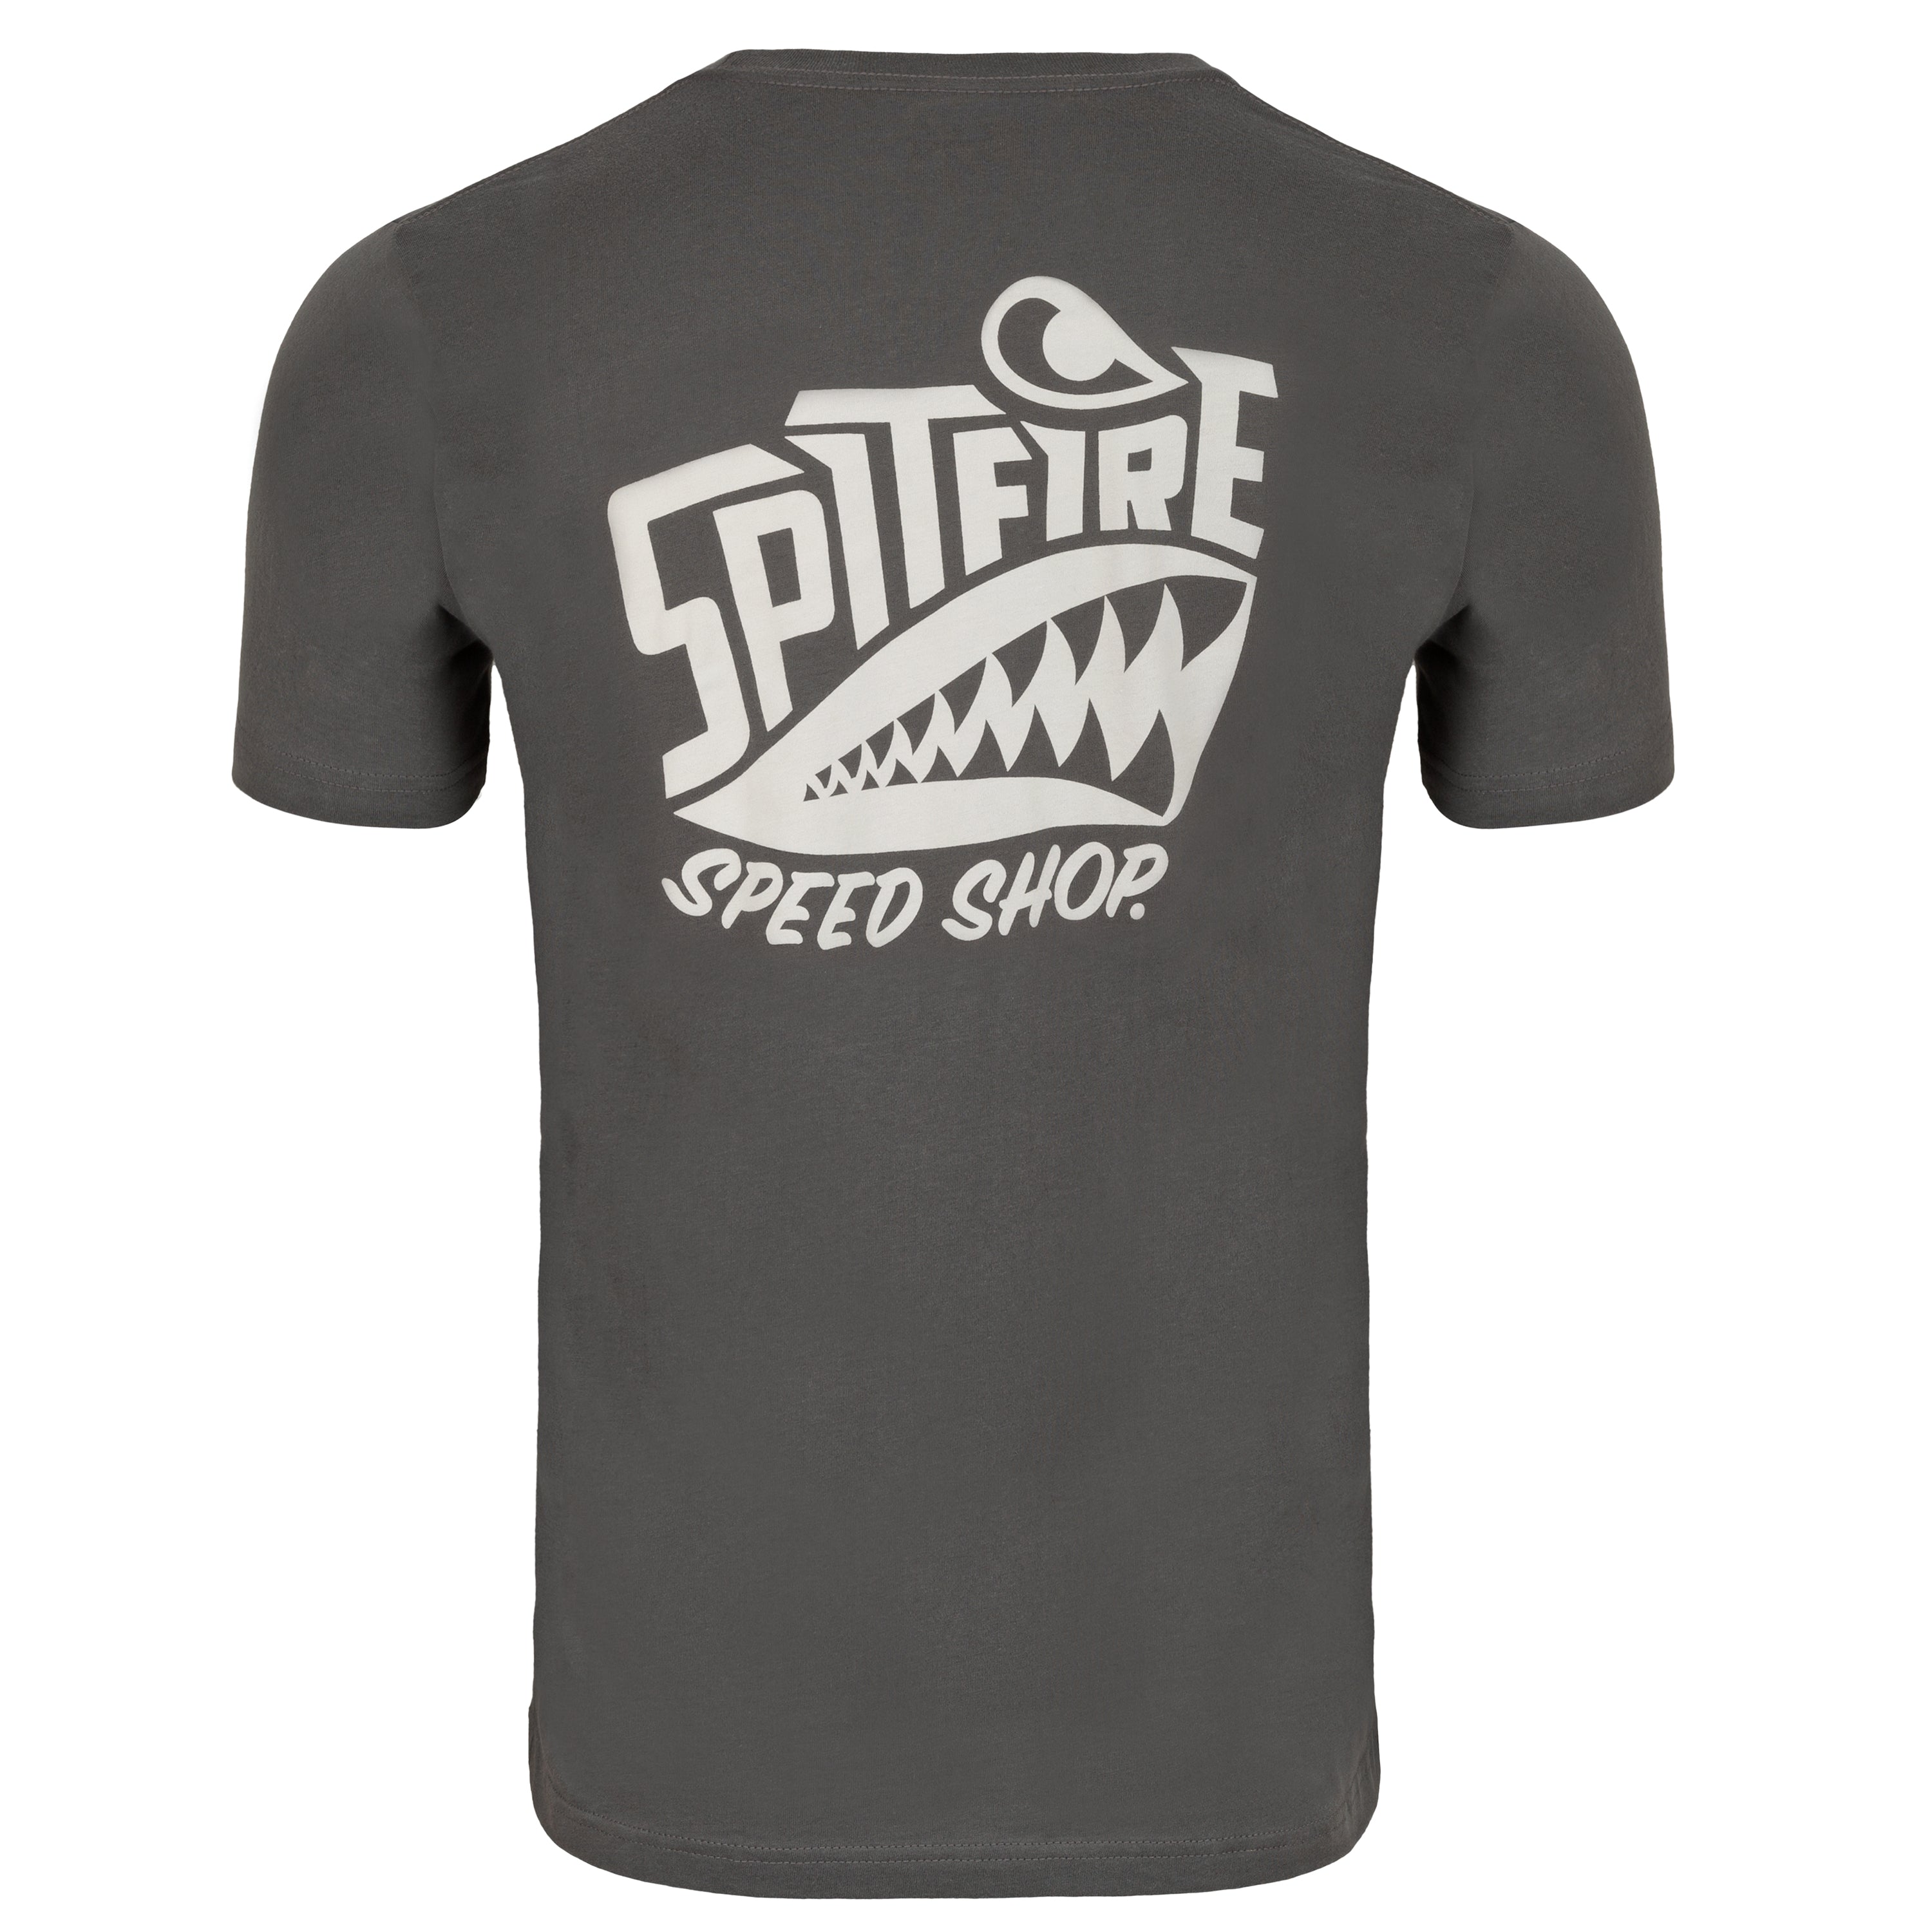 Spitfire Carbon Grey T-Shirt With White Logo